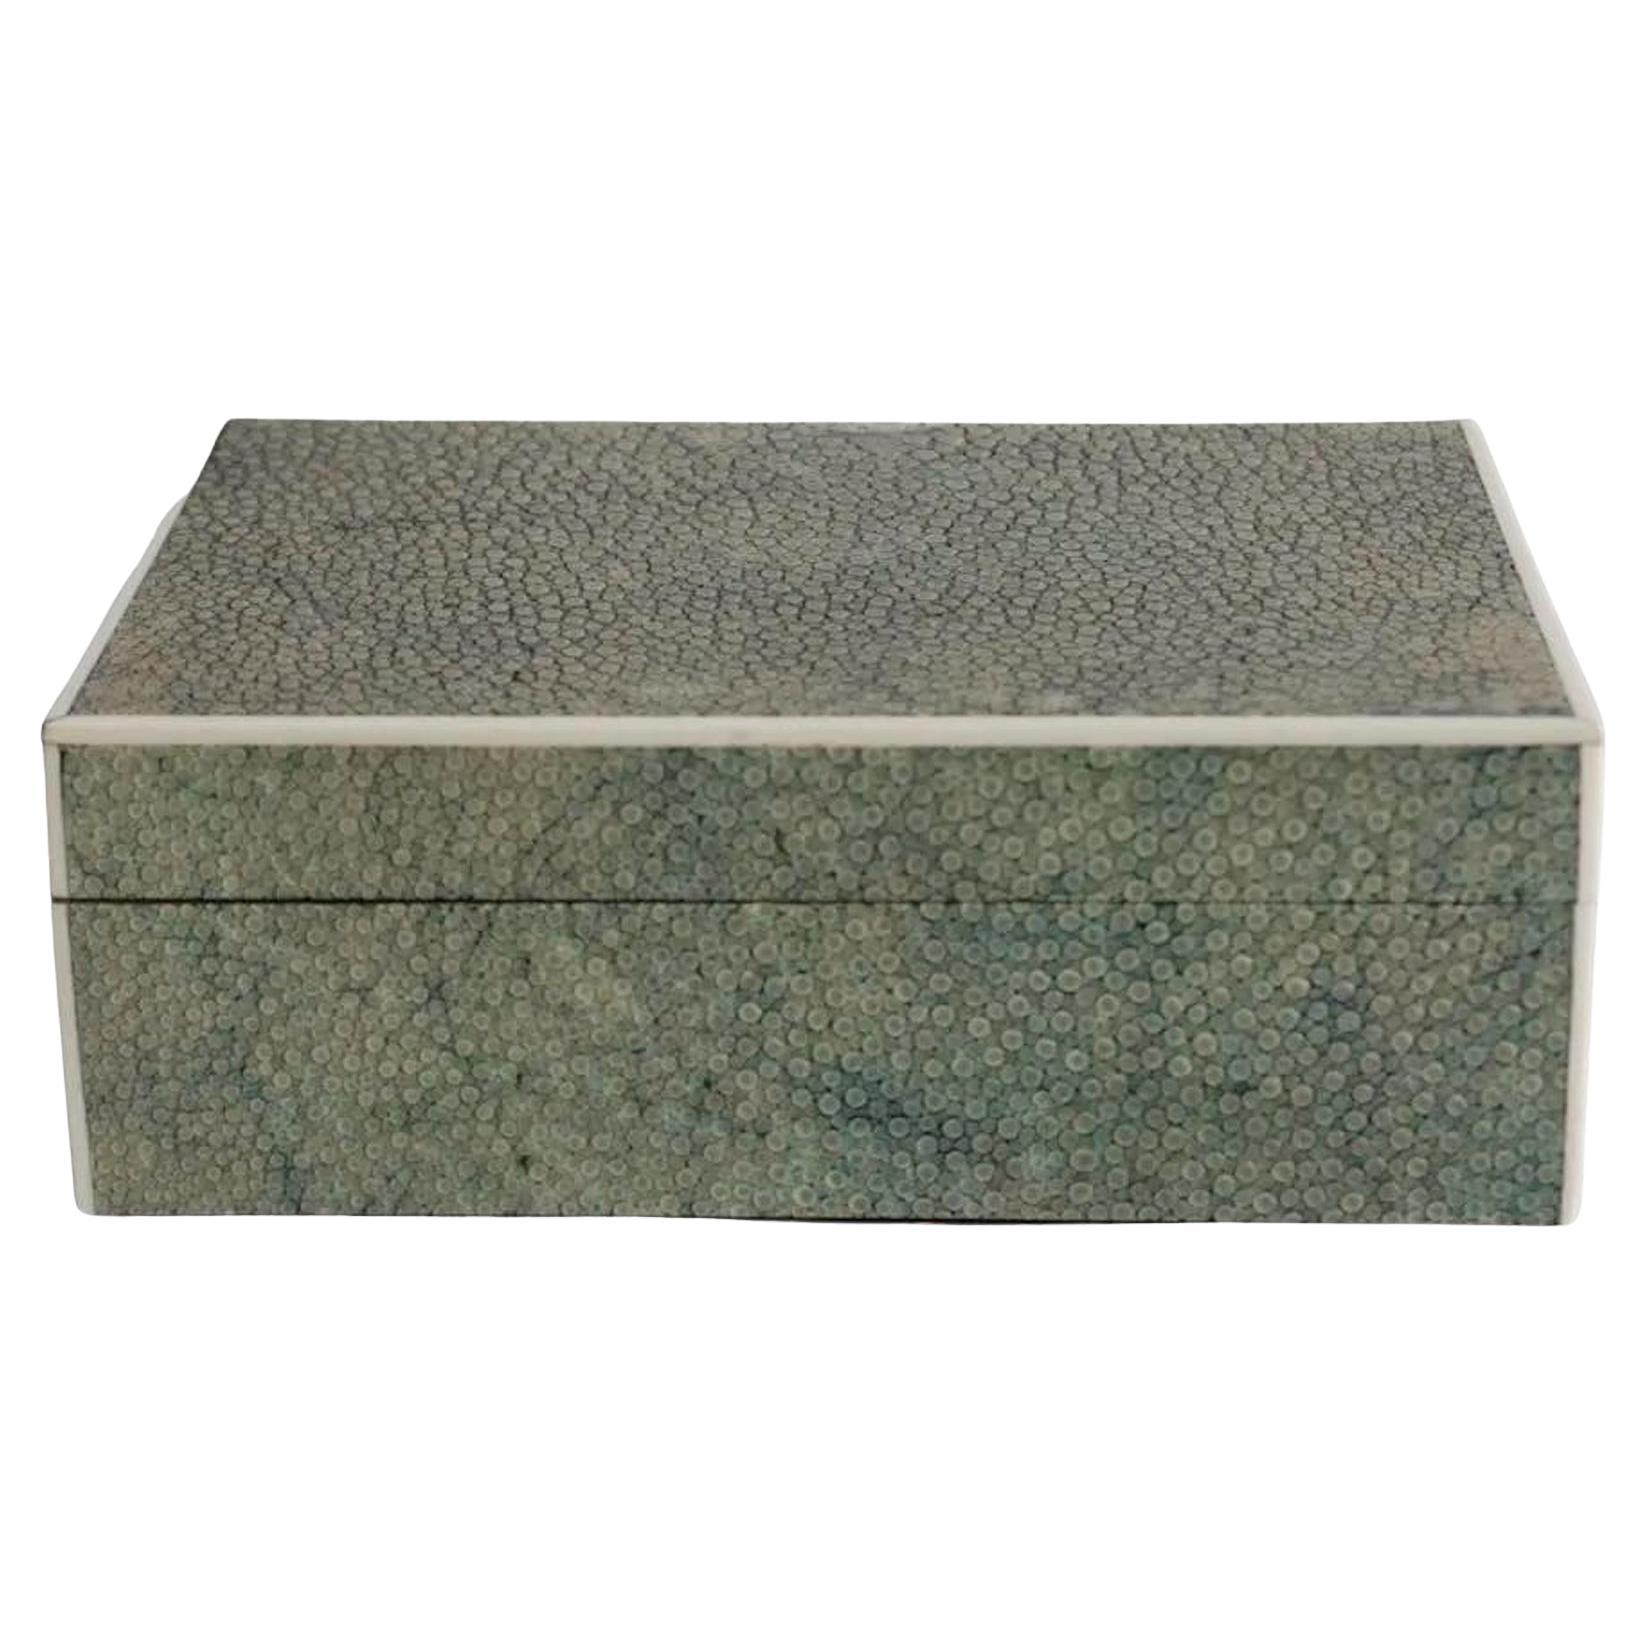 Art Deco Table Box Covered in Green Shagreen & Marked "London Made"